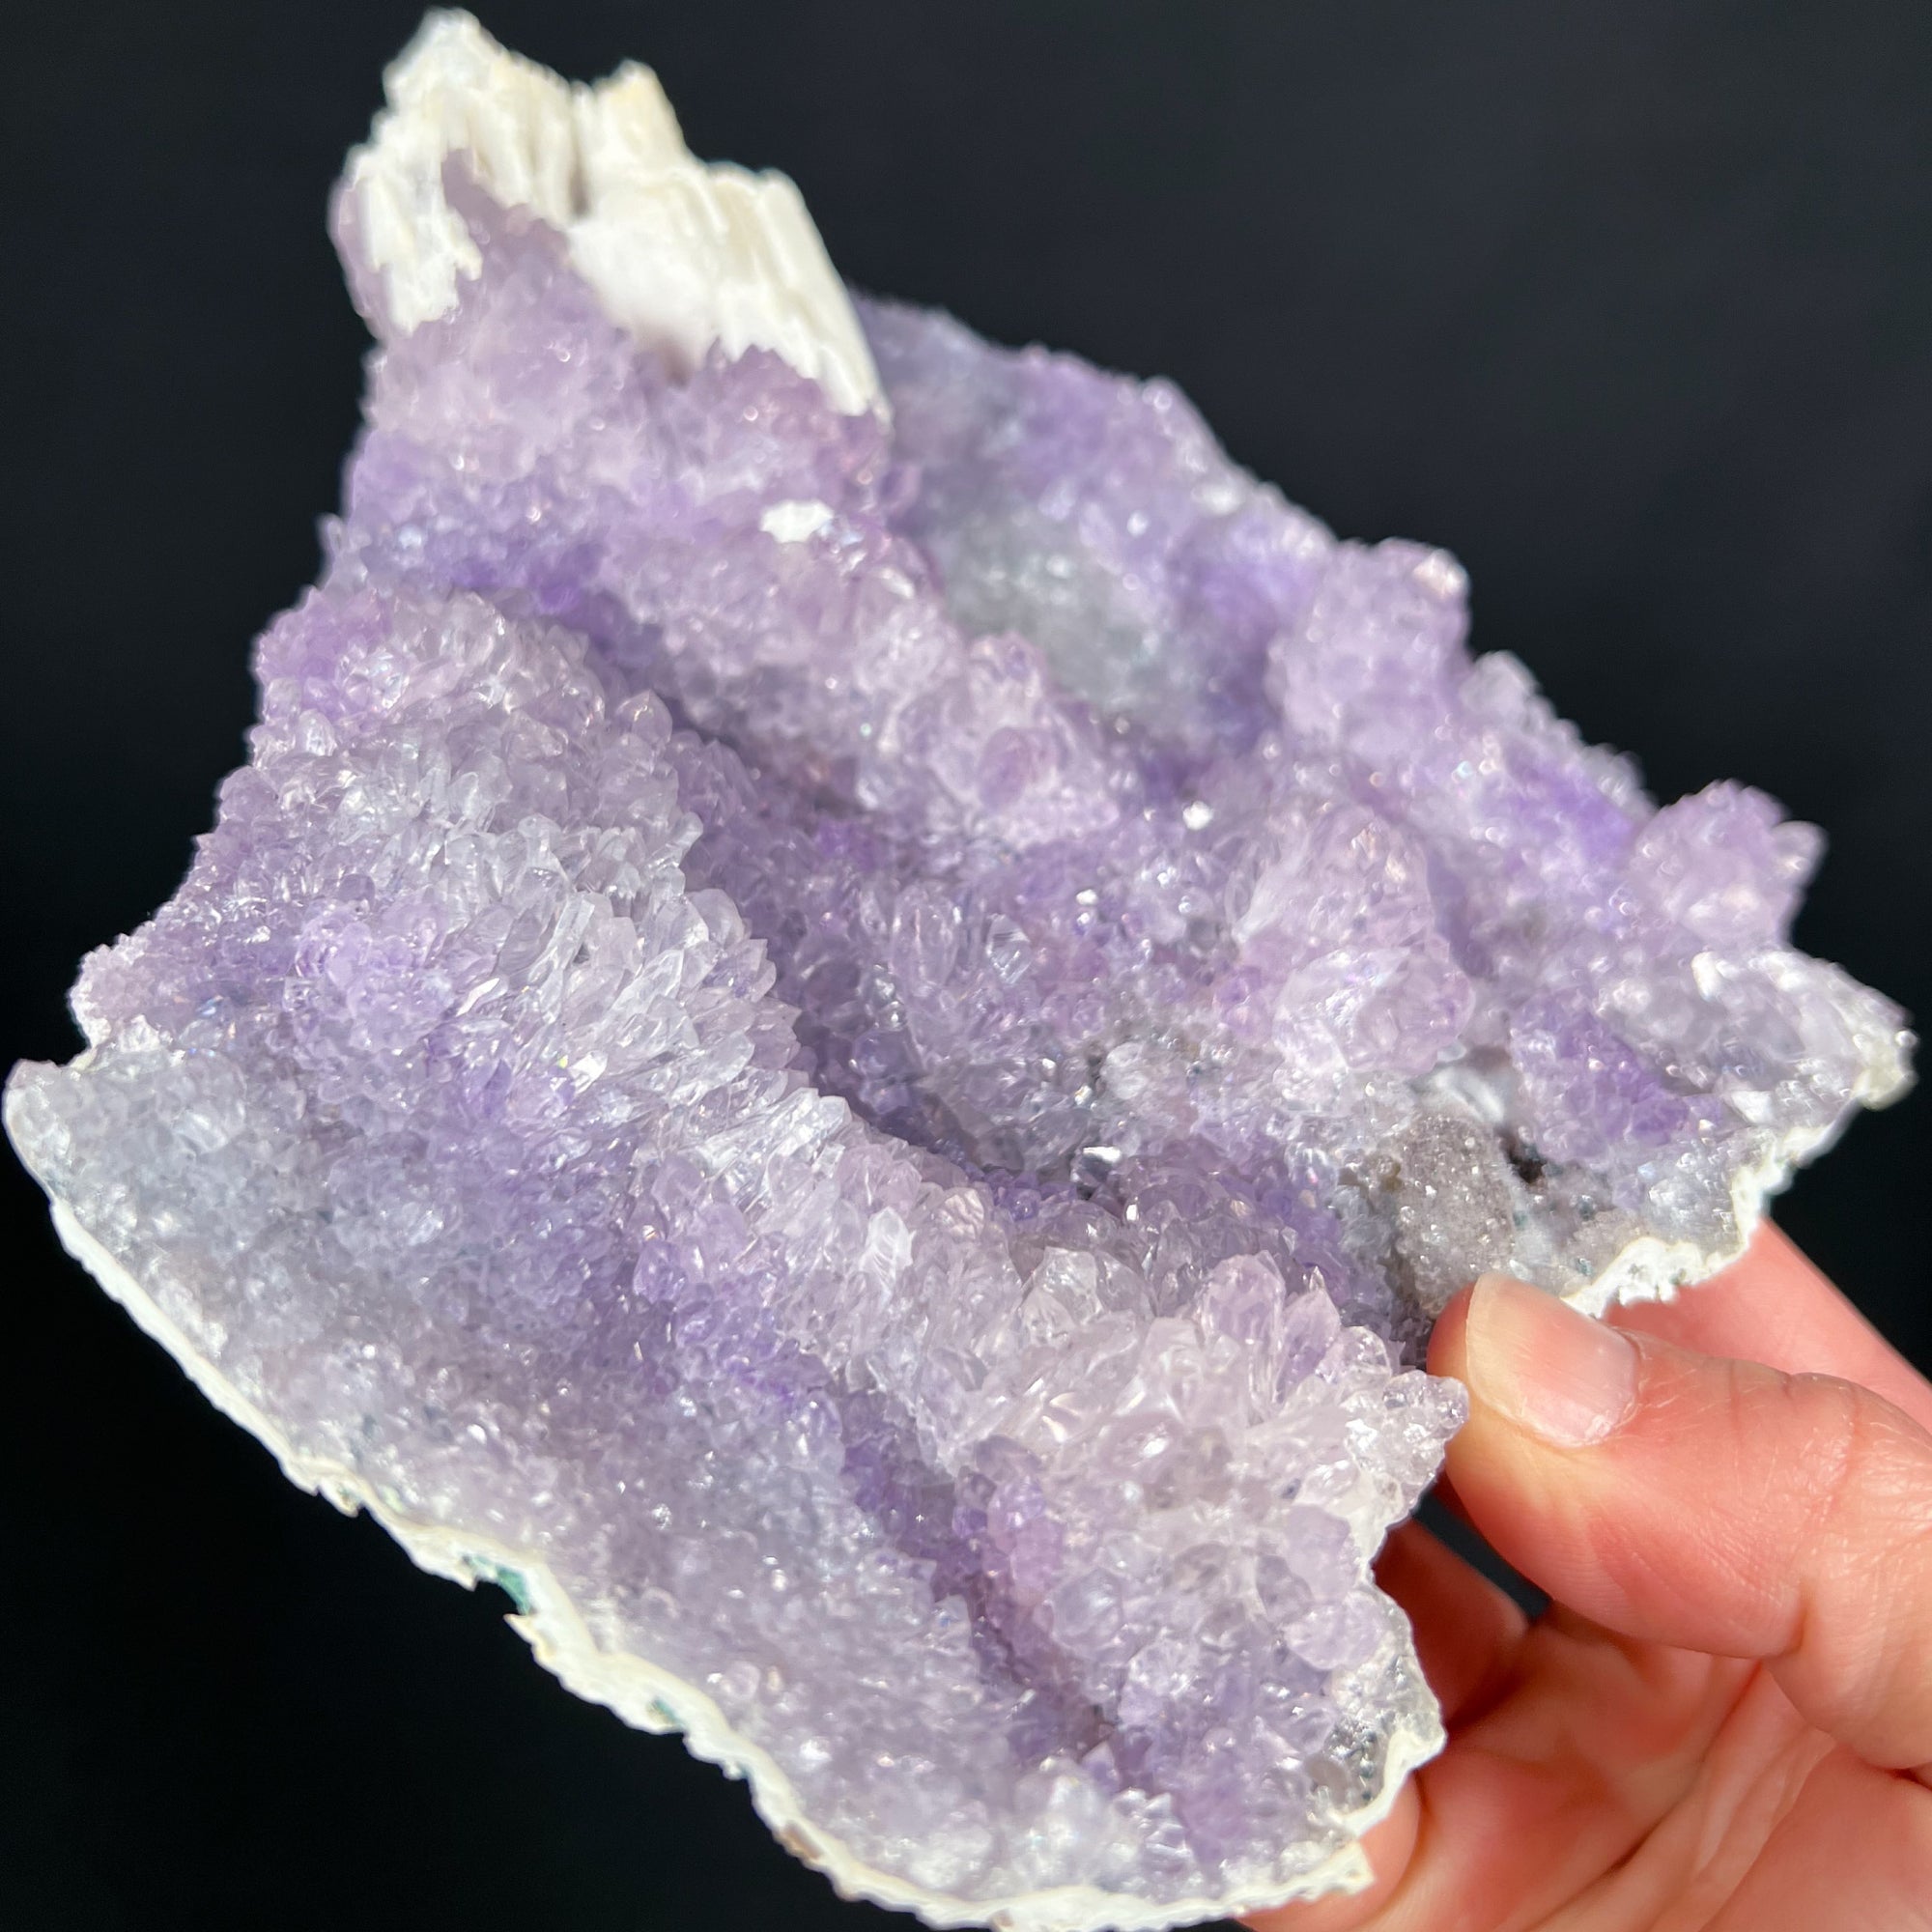 Amethyst Flower Plate with Anhydrite Crystals